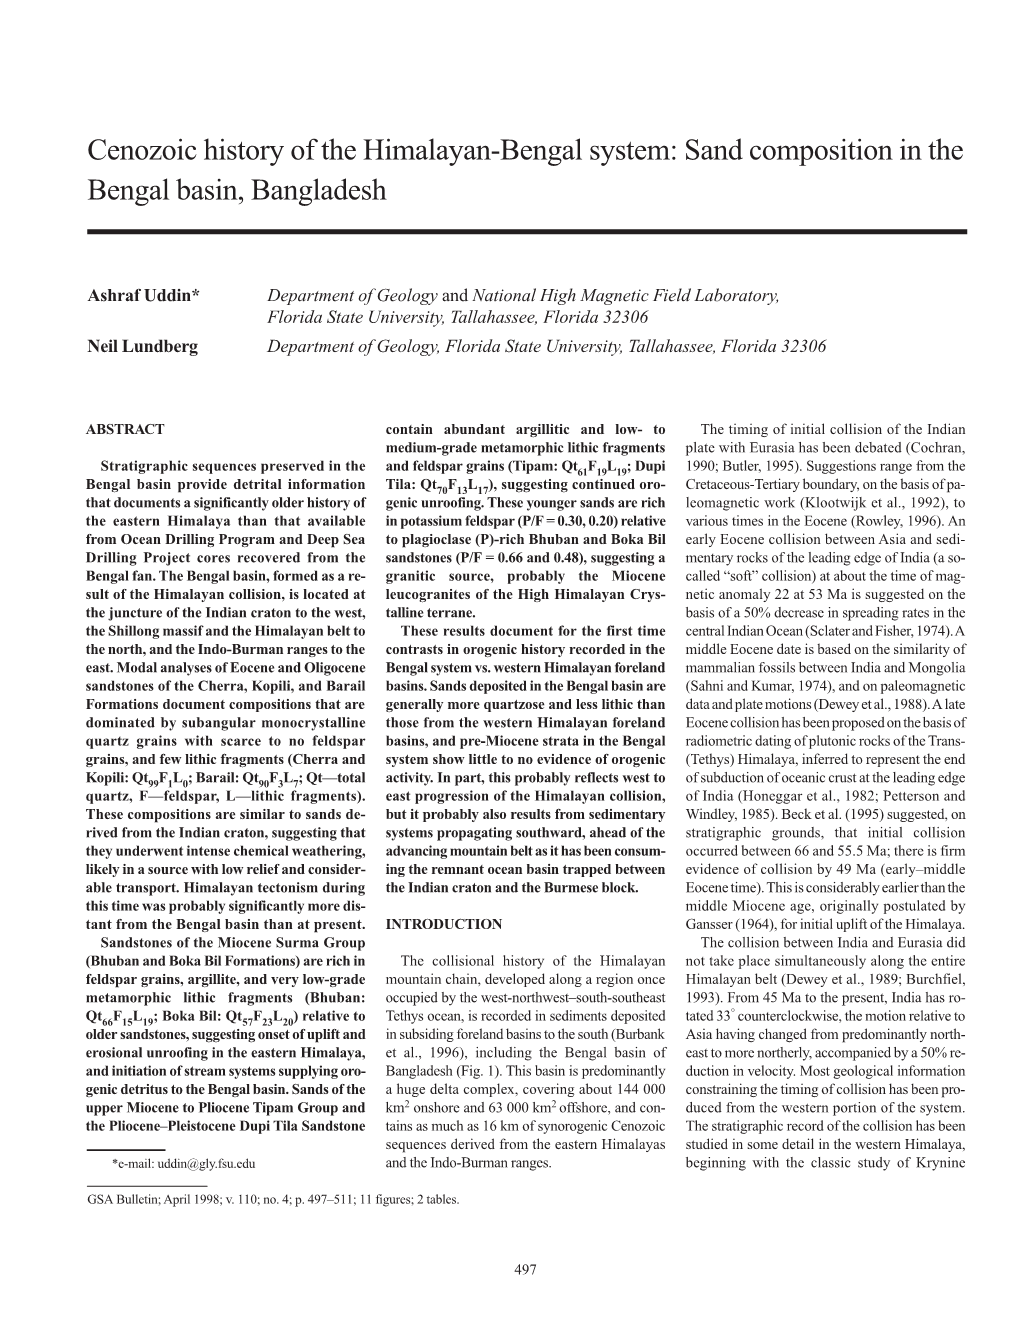 Sand Composition in the Bengal Basin, Bangladesh